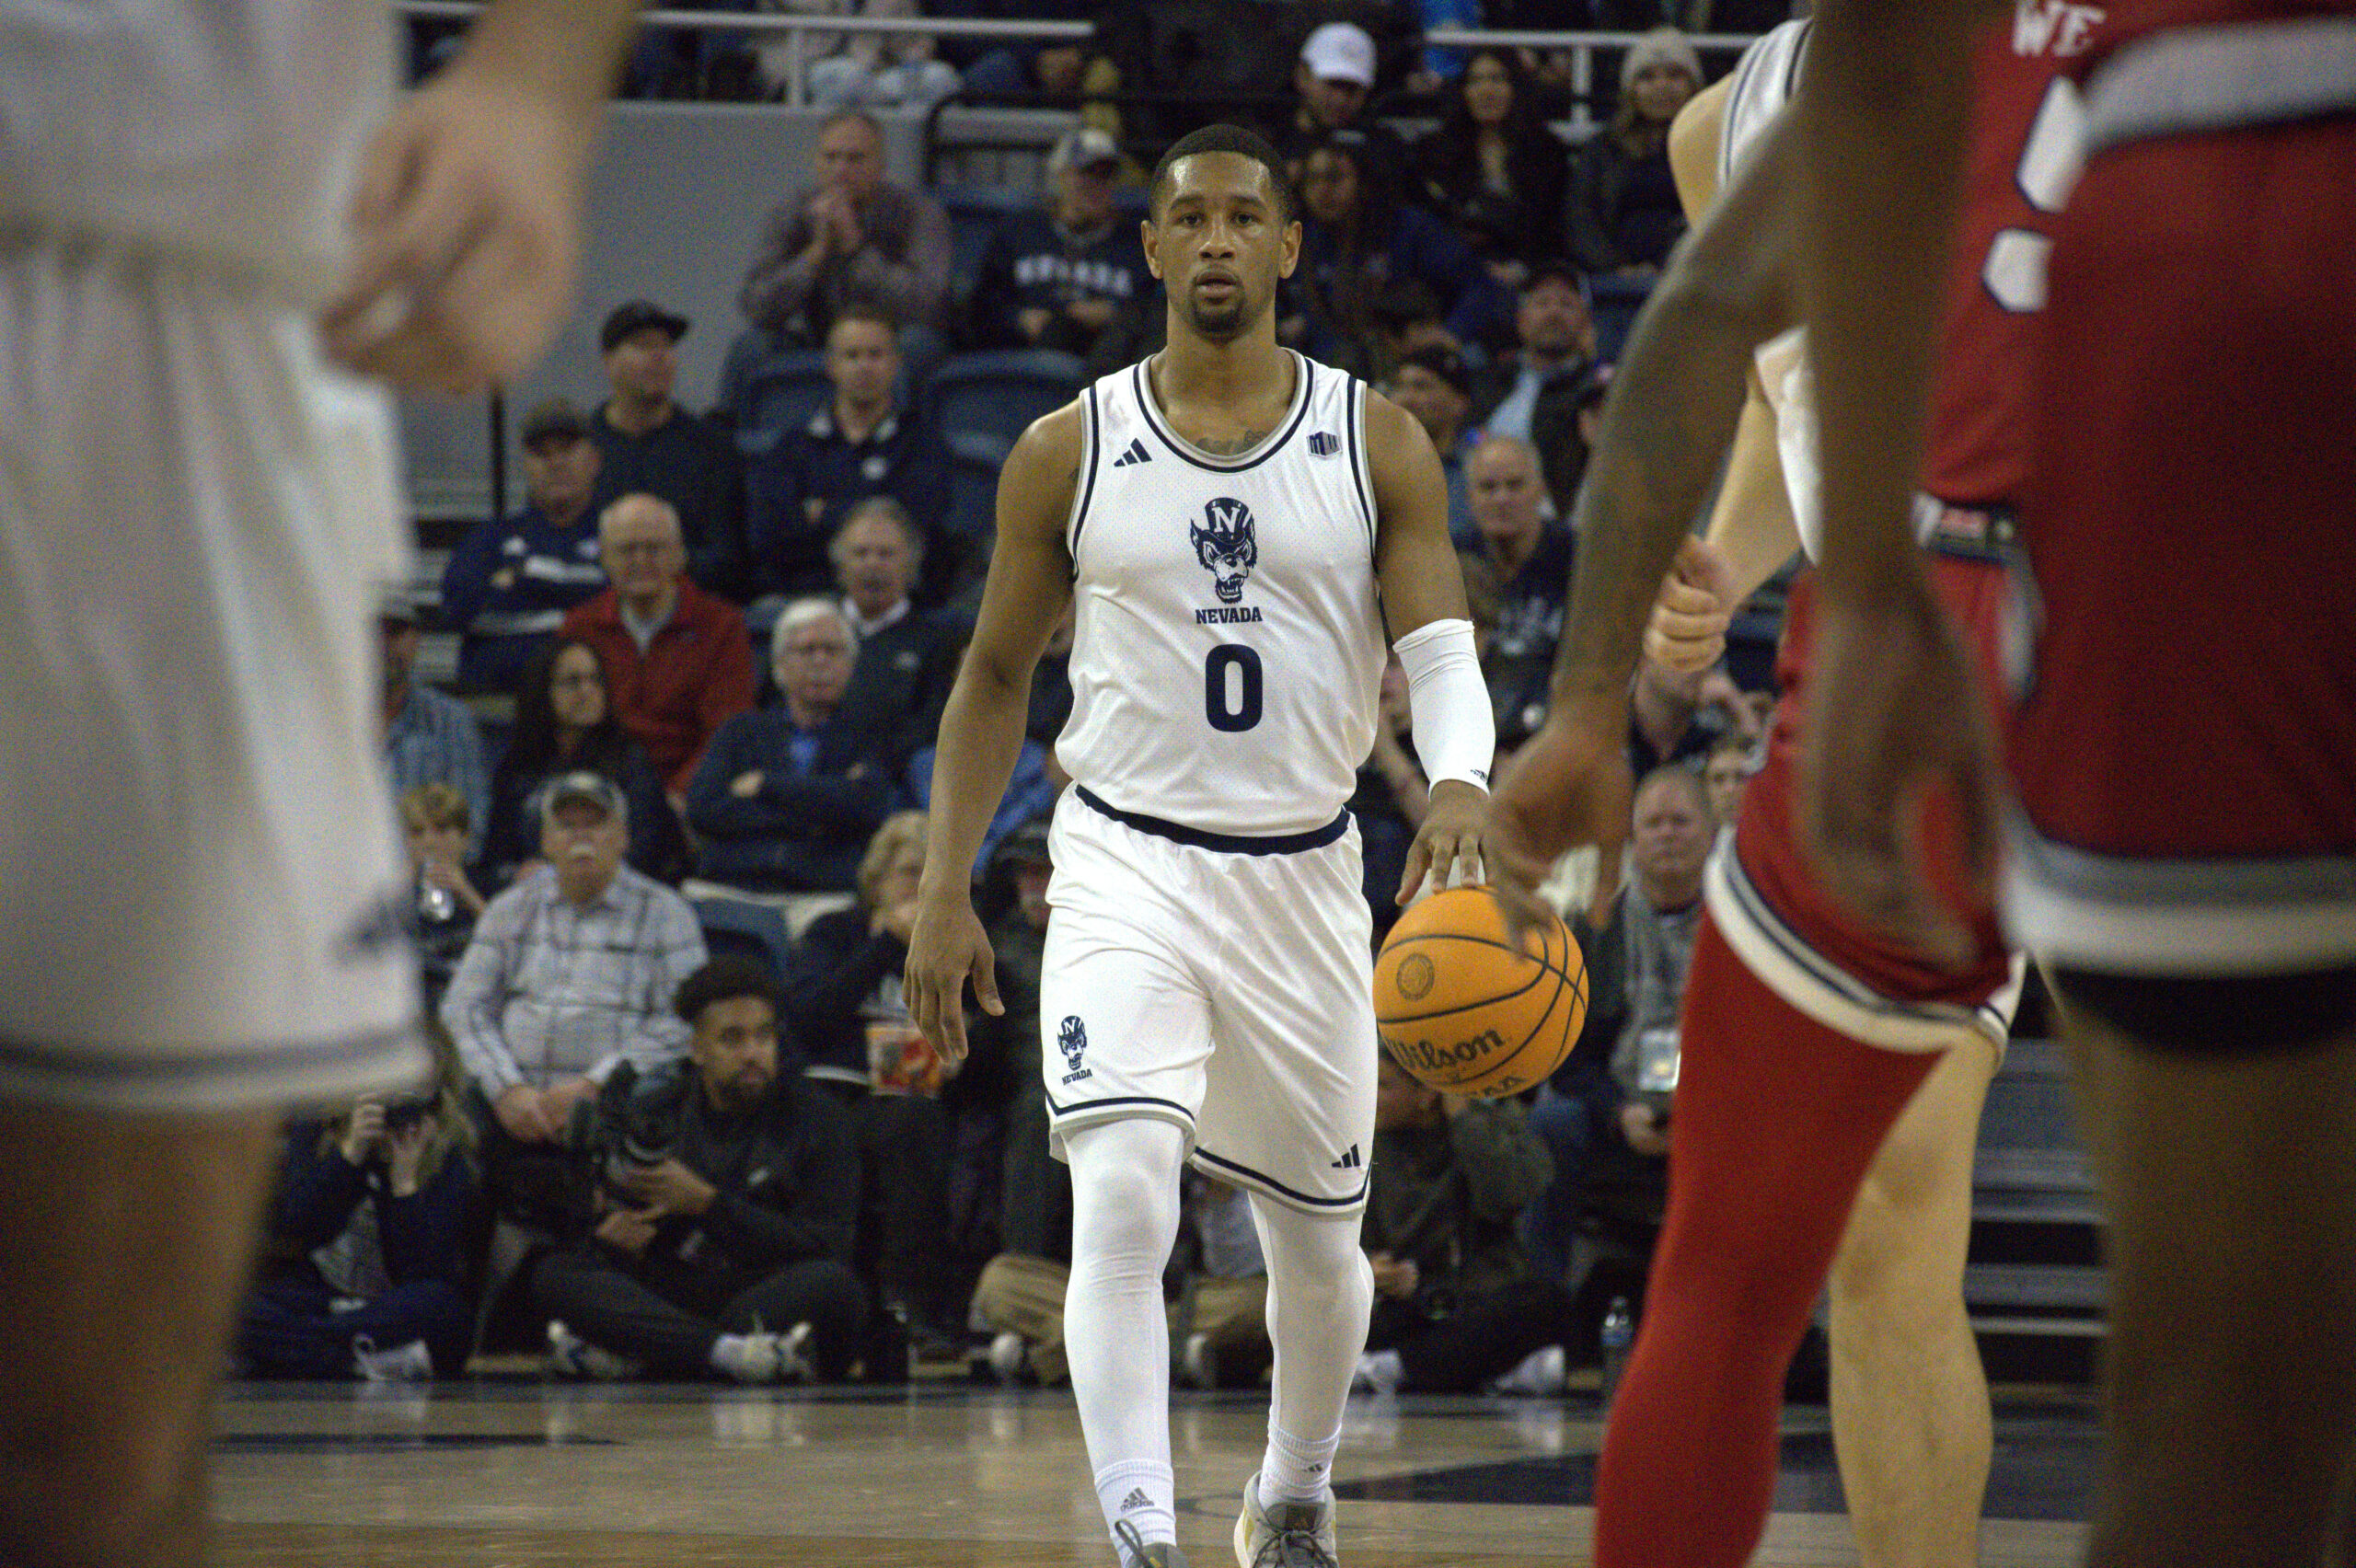 McIntosh’s Career High Led the Pack Past Boise State 76-66